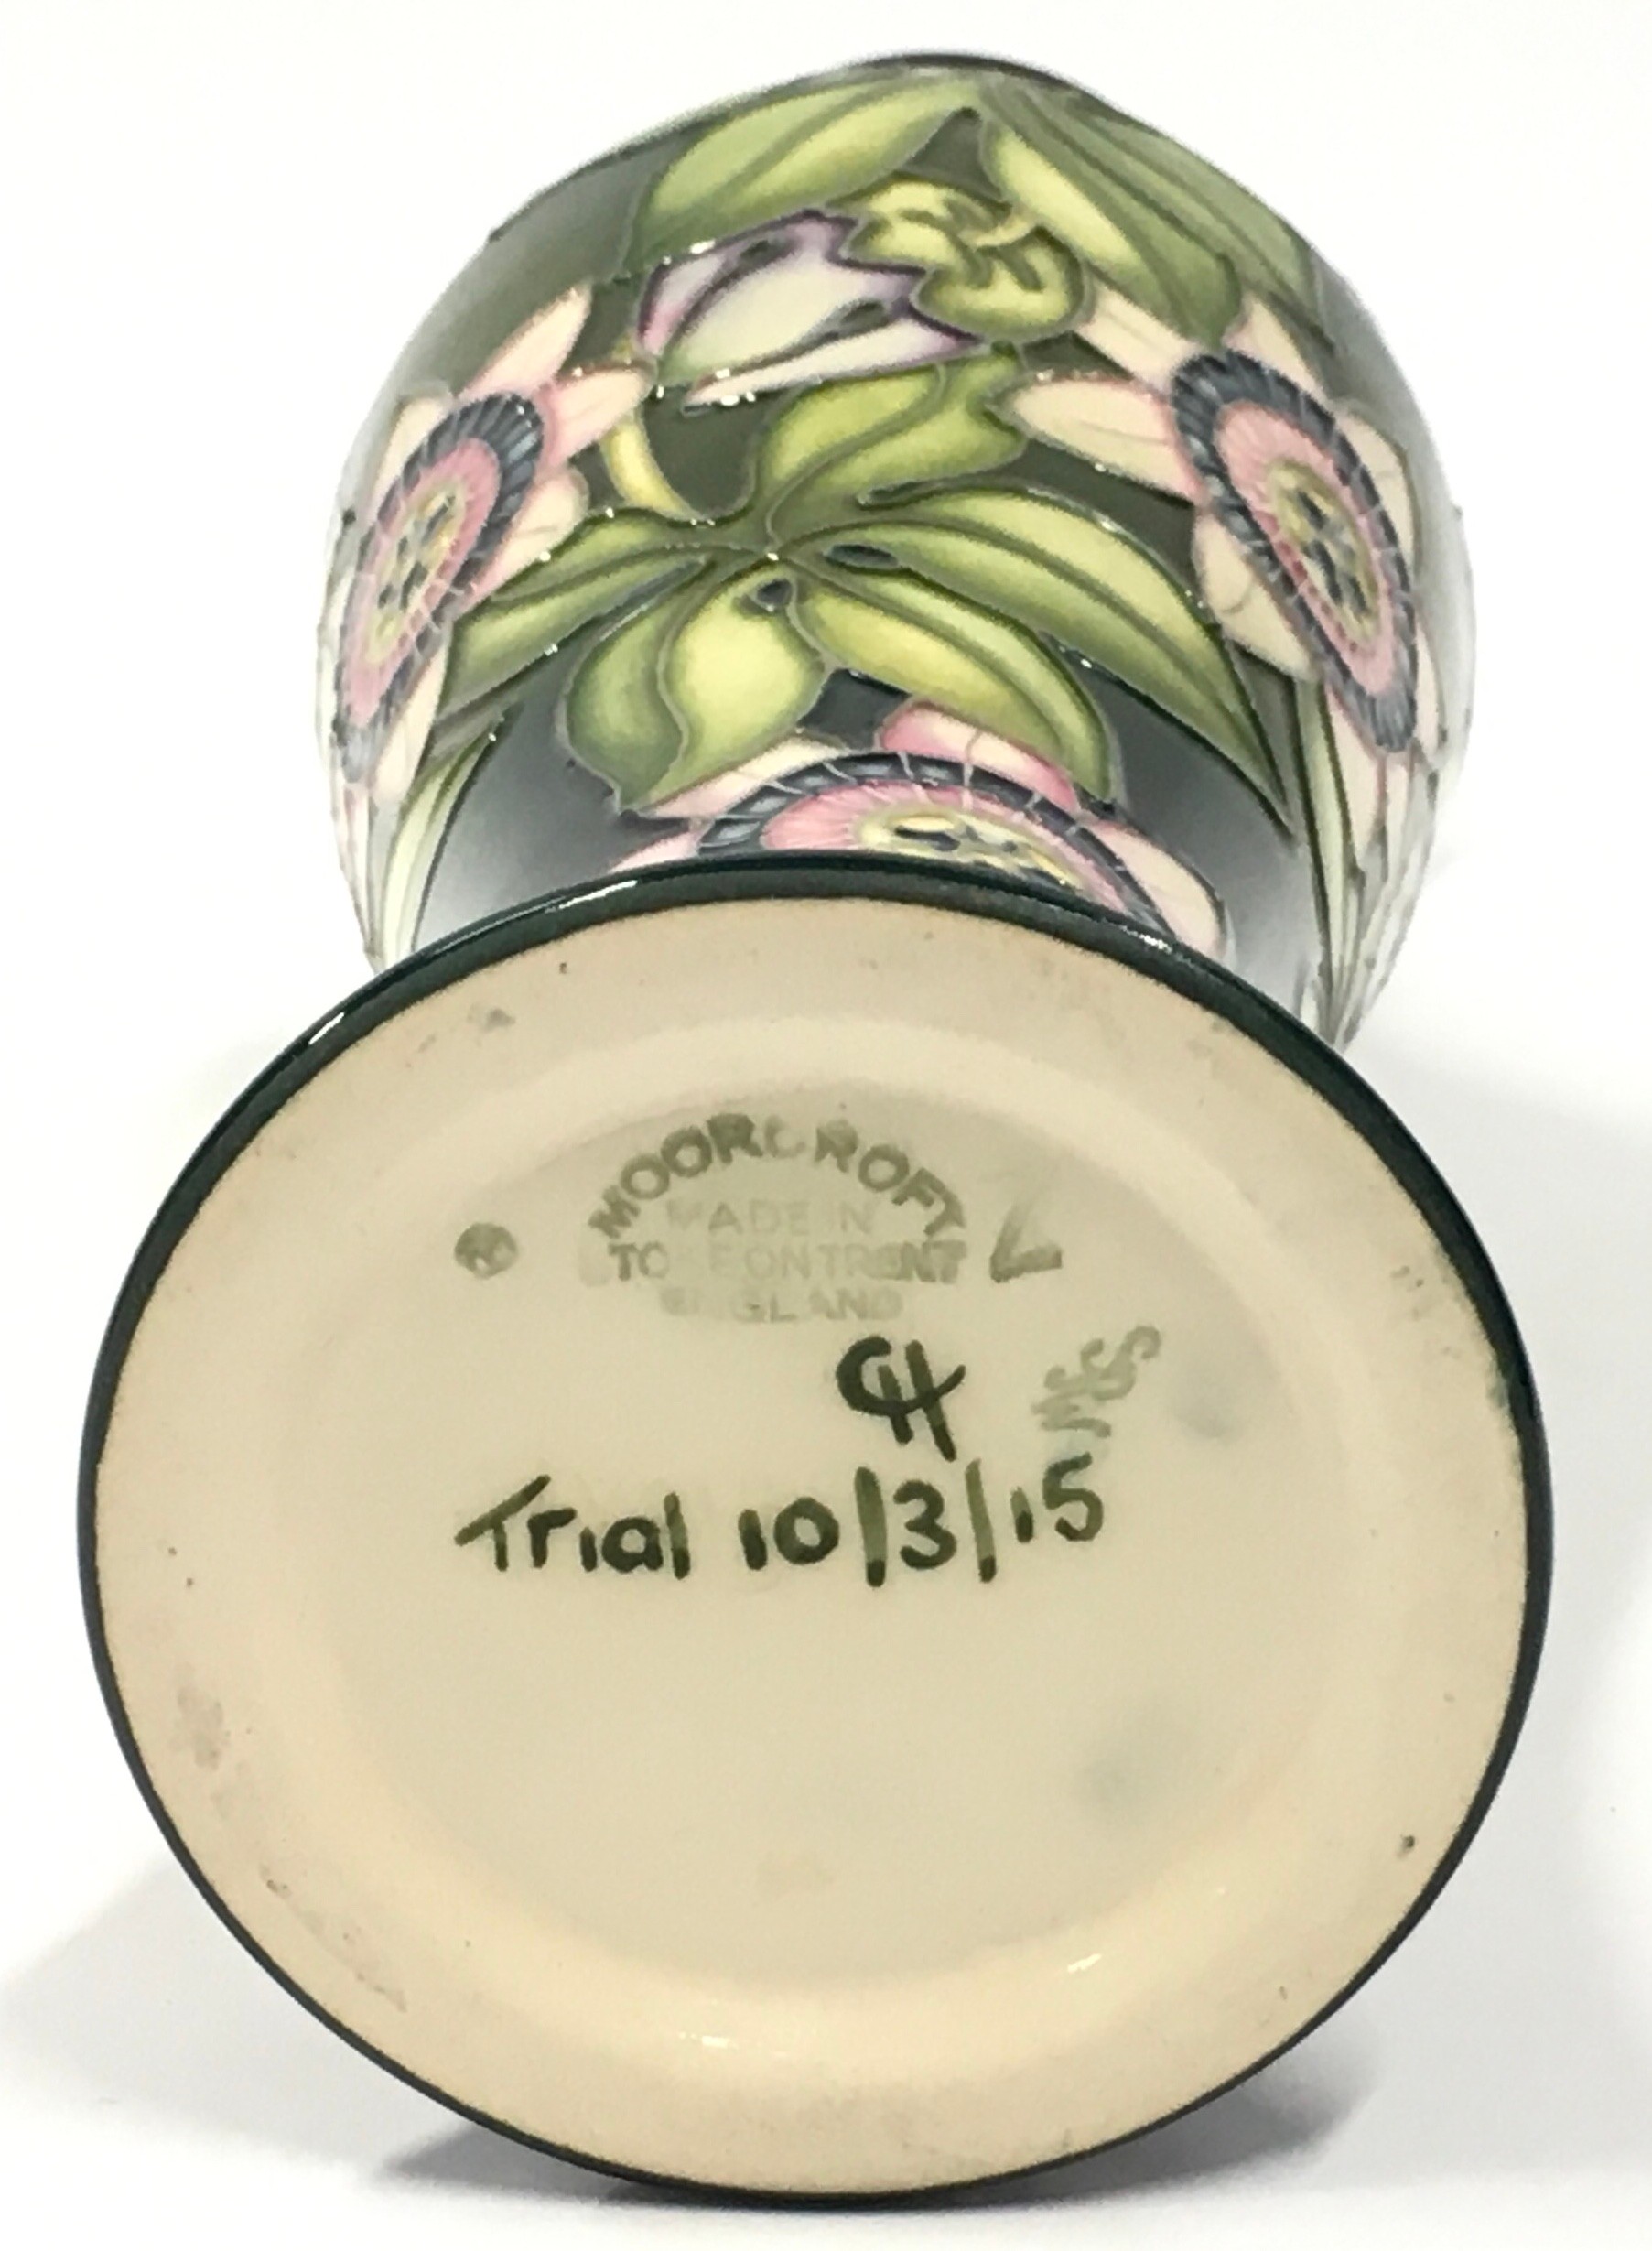 Moorcroft Trial vase 2015. 26cm tall. Signed and stamped to base. - Image 4 of 4